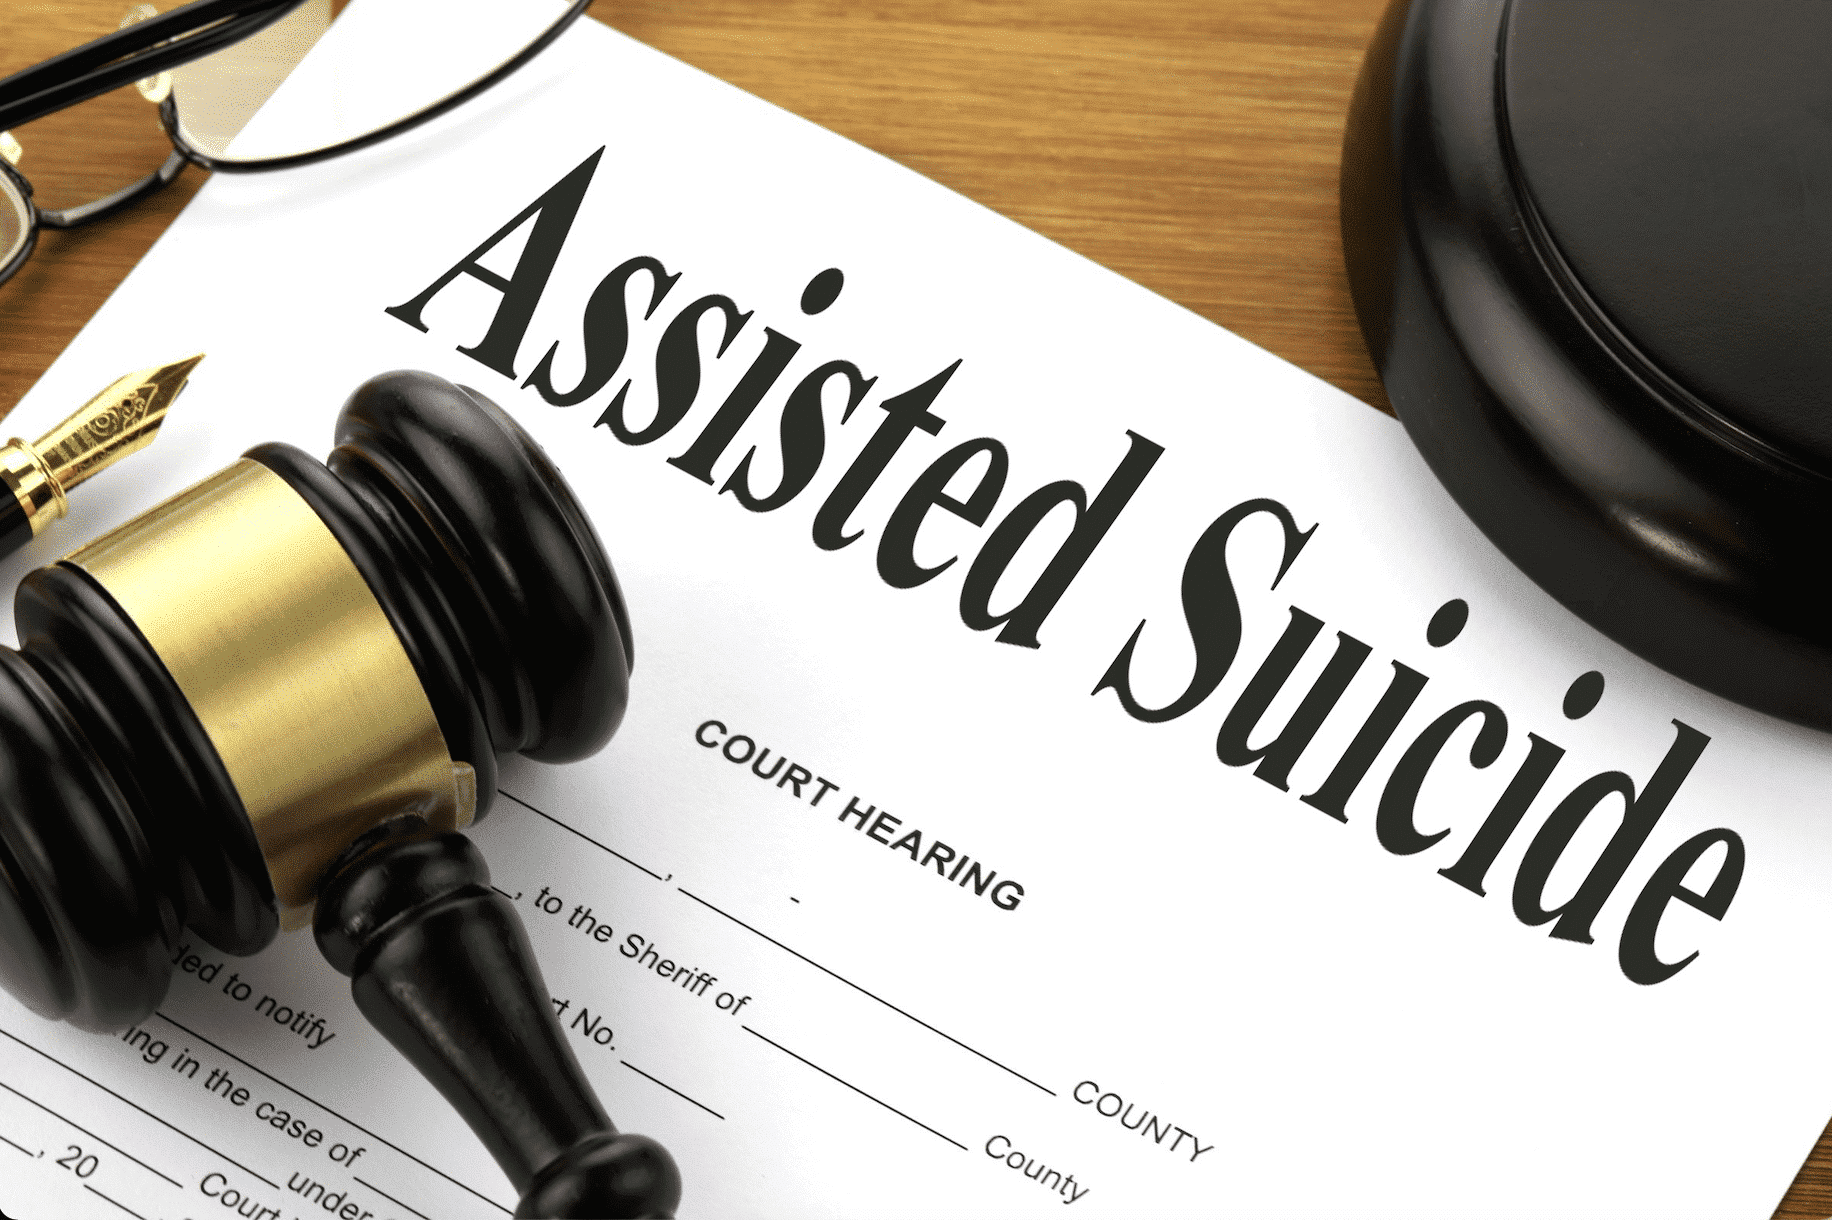 assisted suicide court hearing